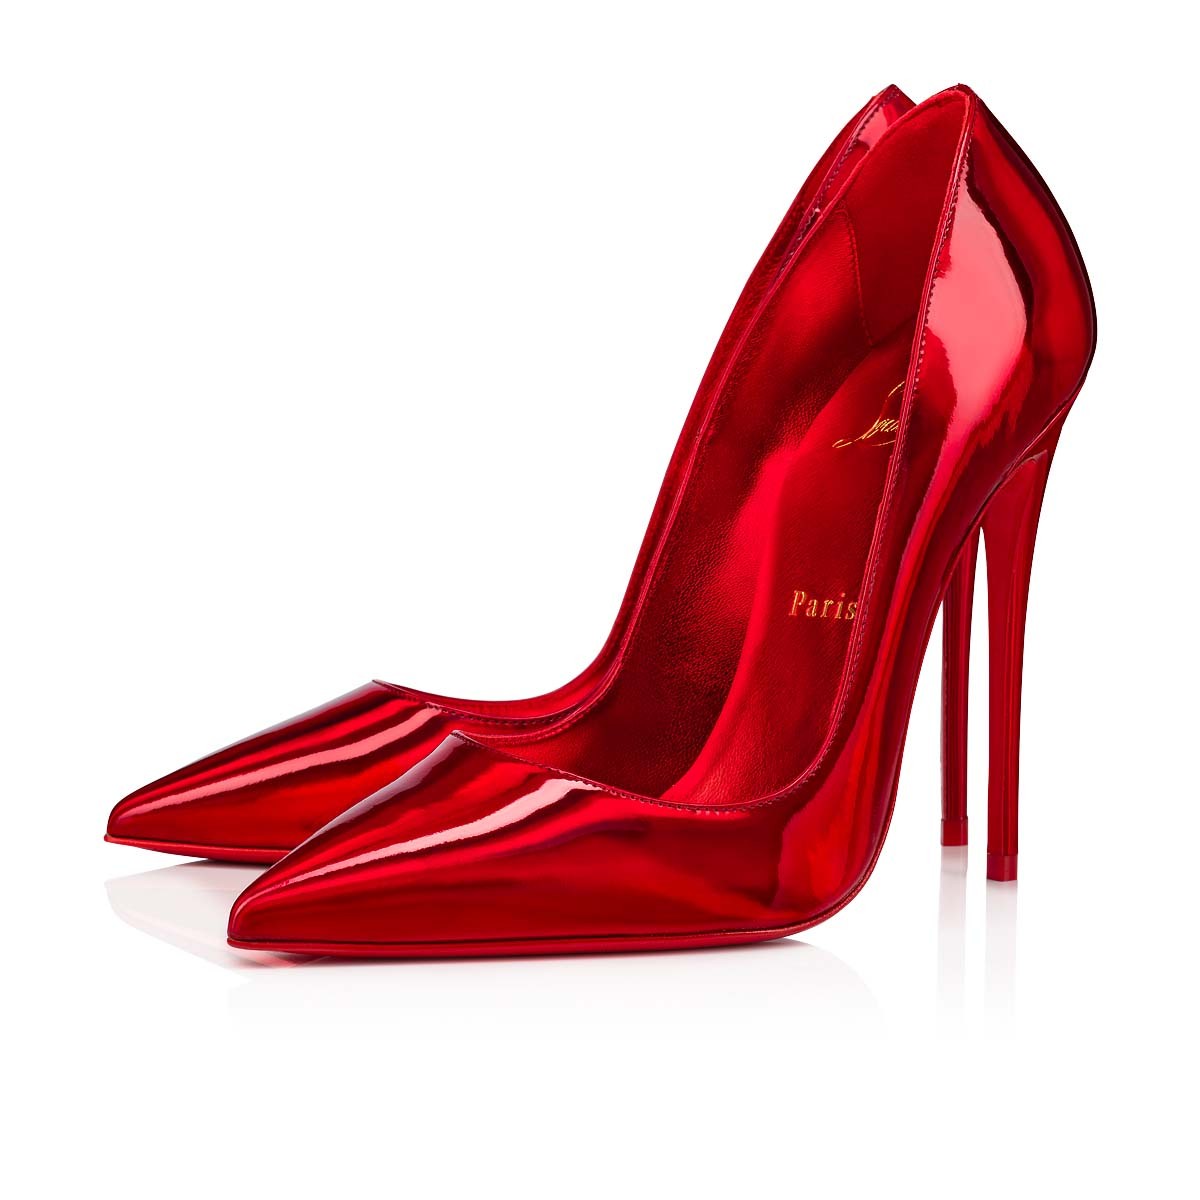 So Kate 85 mm Pumps Loubi Patent Calf Psychic Red